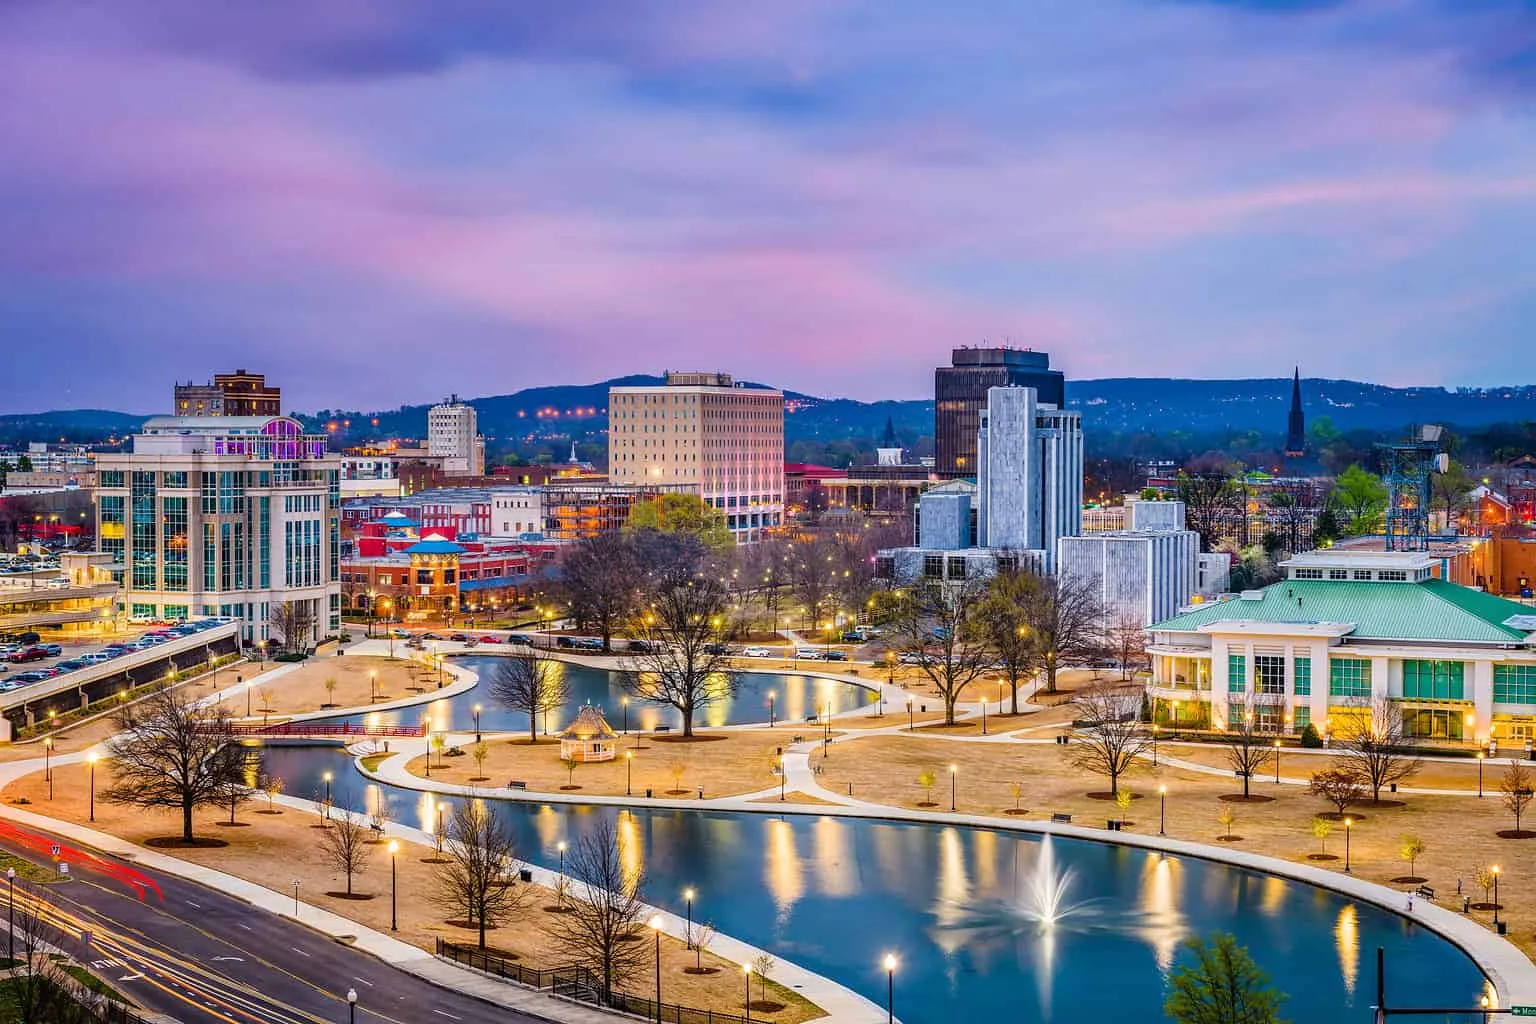 Huntsville, AL, has been named one of the Best Places to Live in the United States. It’s located in Madison County, one of the fastest-growing counties in Alabama.